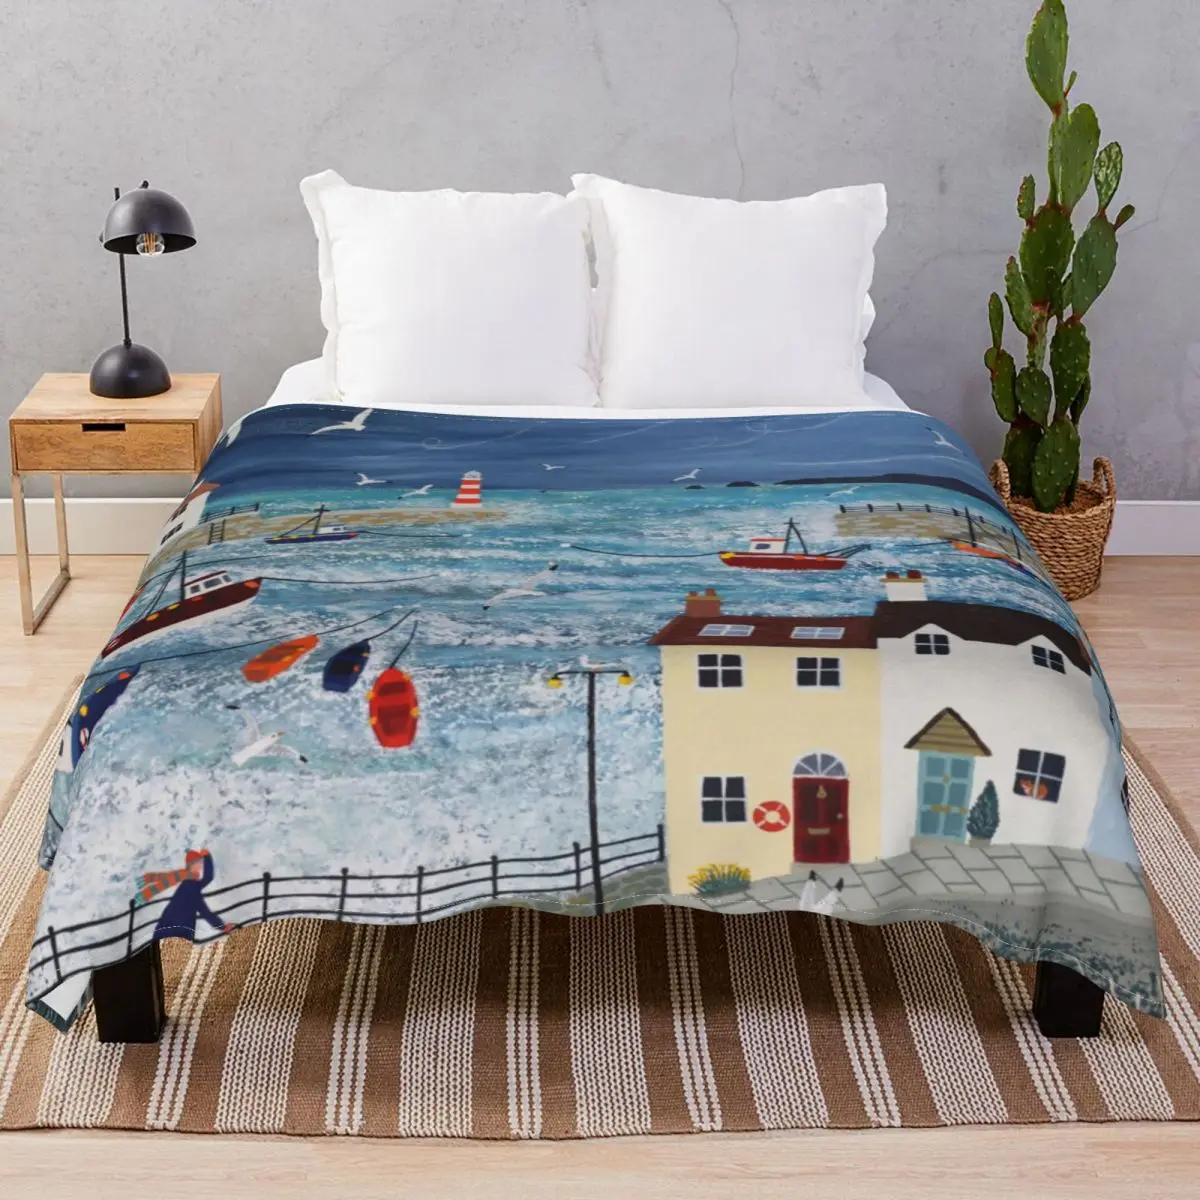 

Stormy Harbour Blanket Coral Fleece Textile Decor Ultra-Soft Throw Blankets for Bedding Sofa Camp Office